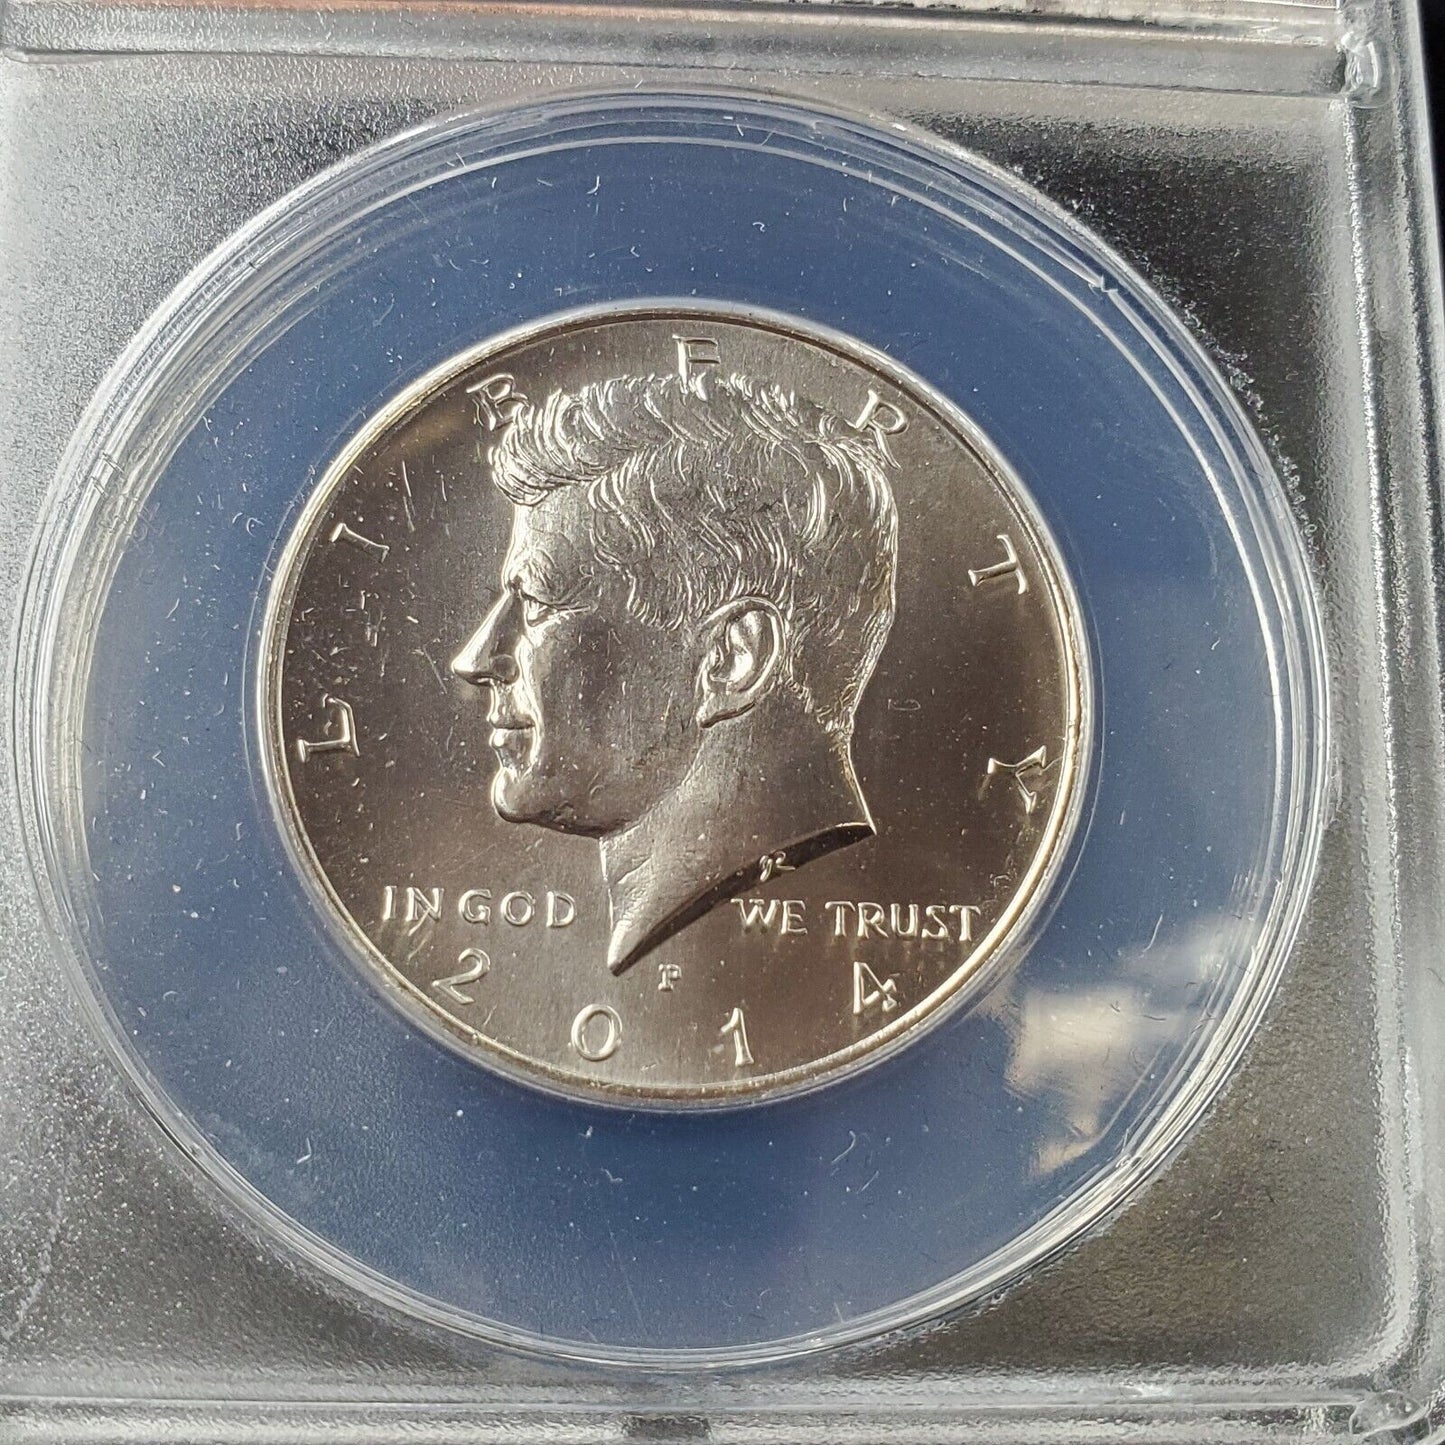 2014 P & D Kennedy Half Dollar High Relief ANACS SP69 First Release ANA Chicago